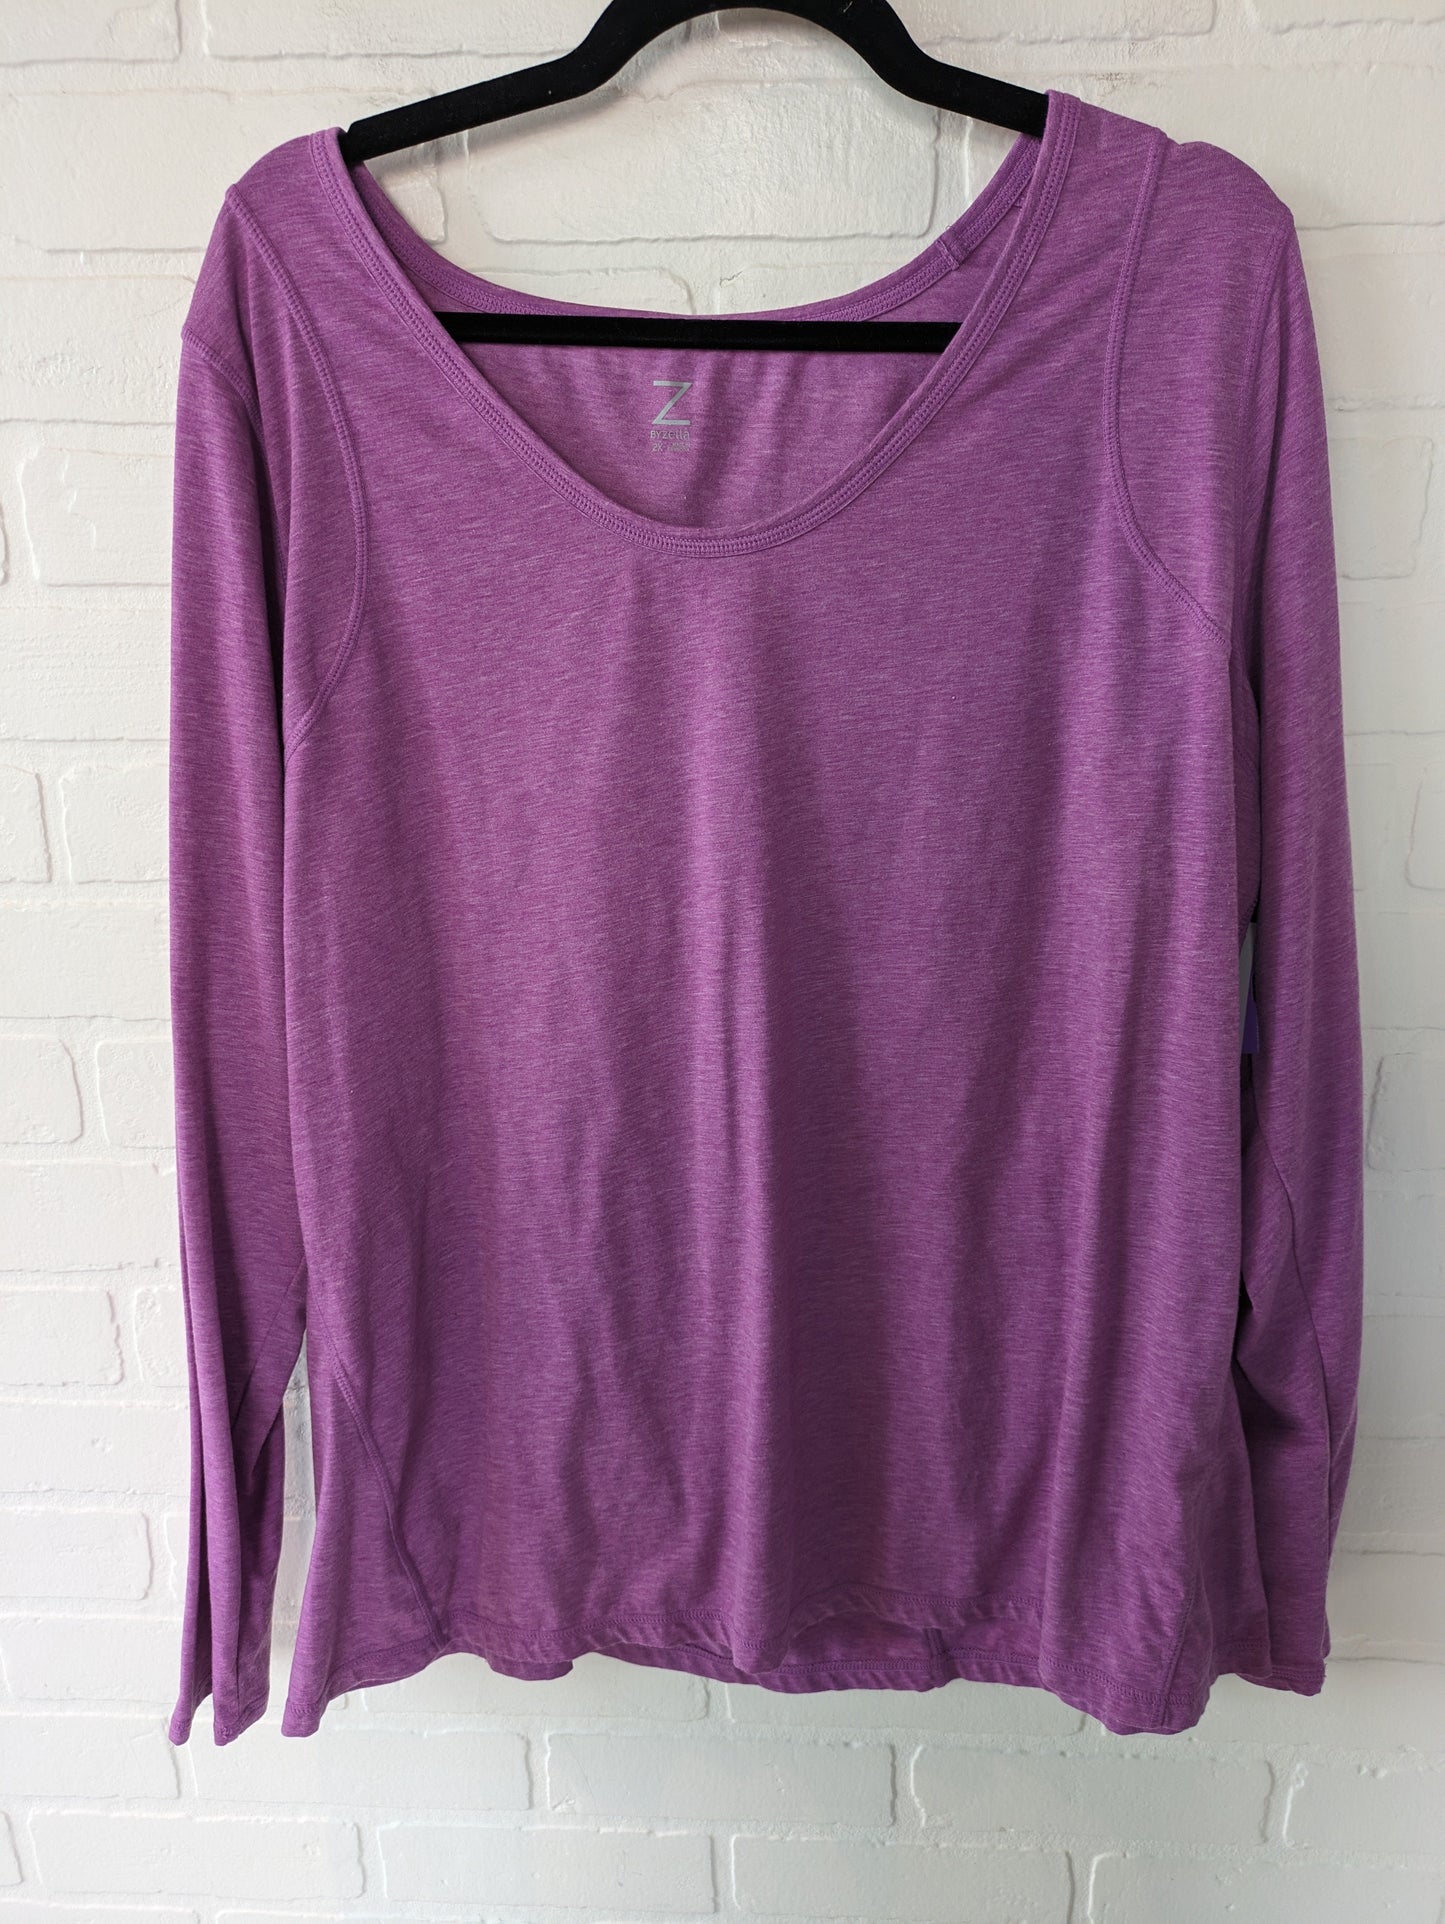 Athletic Top Long Sleeve Crewneck By Zella  Size: 2x